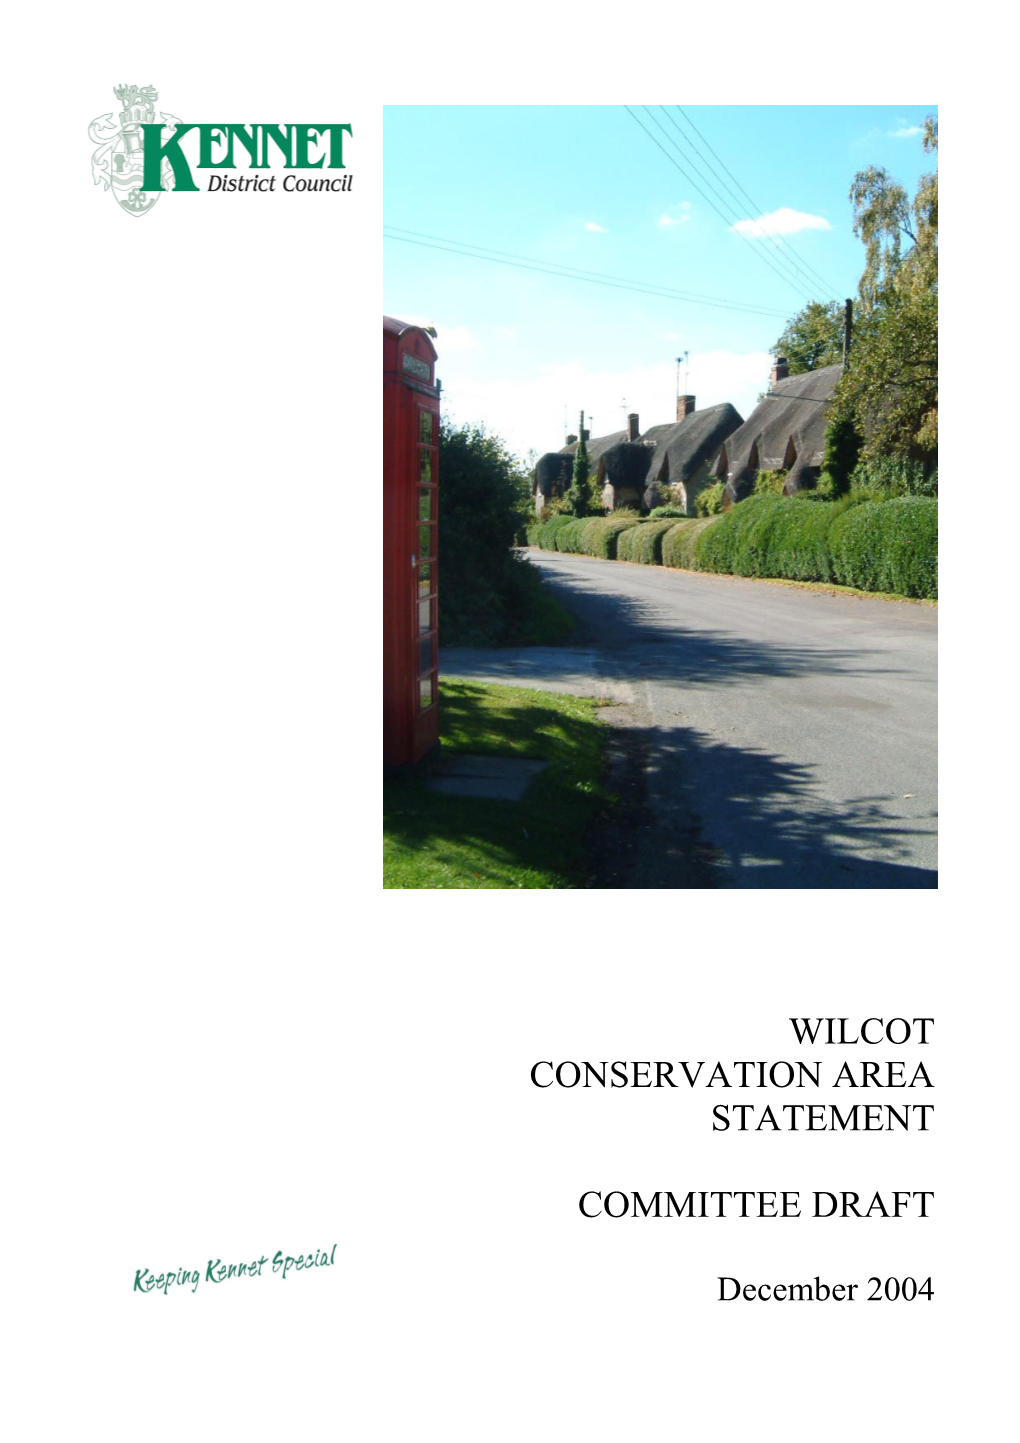 Wilcot Conservation Area Statement Committee Draft